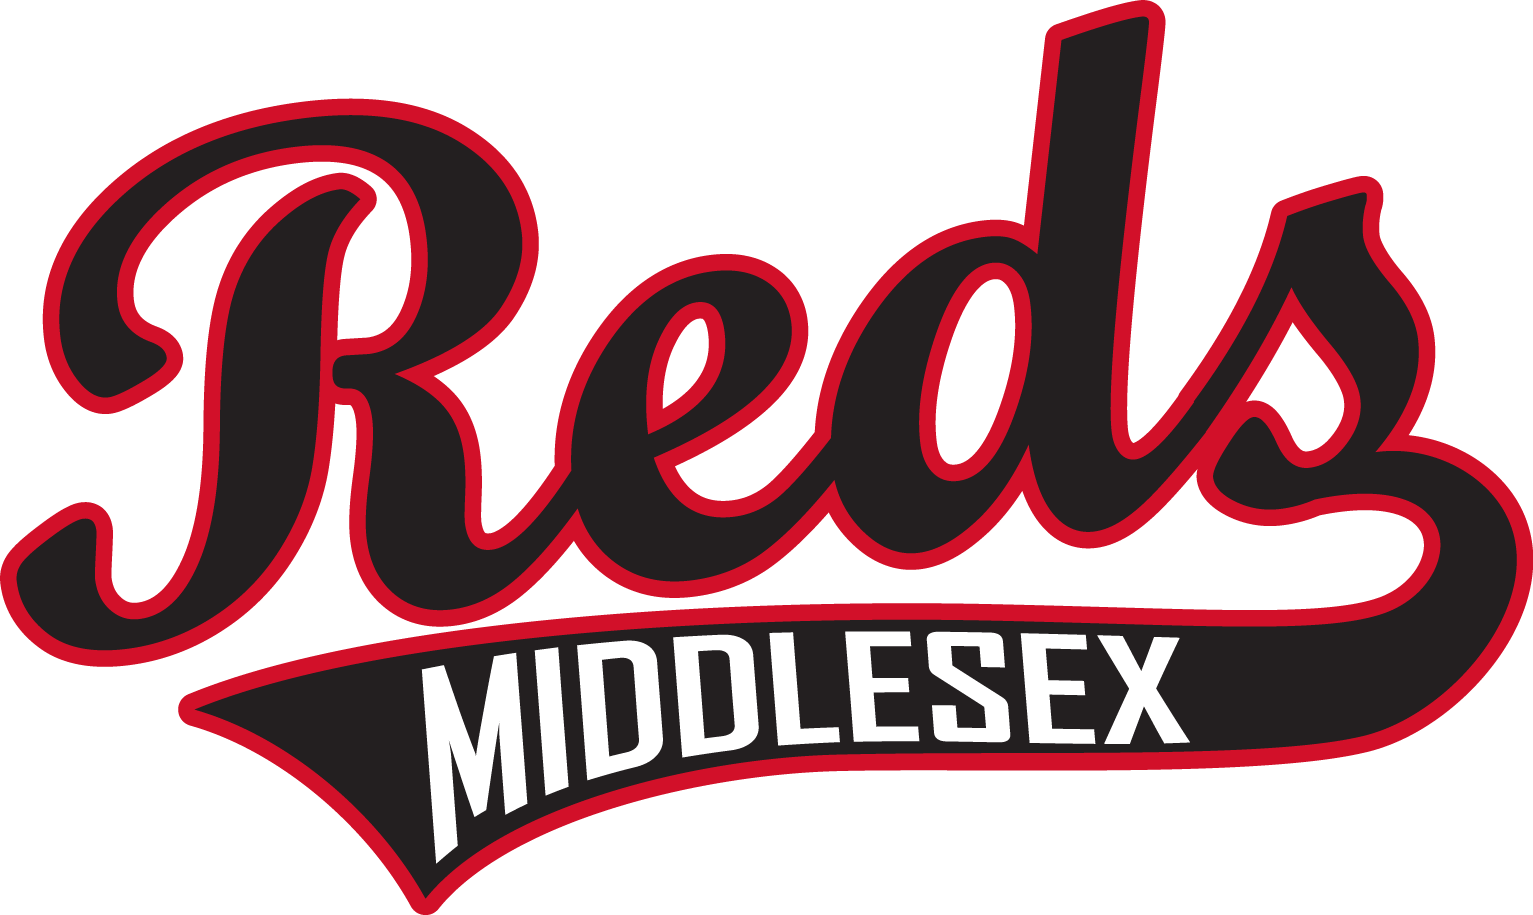 Middlesex Reds Logo - BLACK with RED OUTLINE